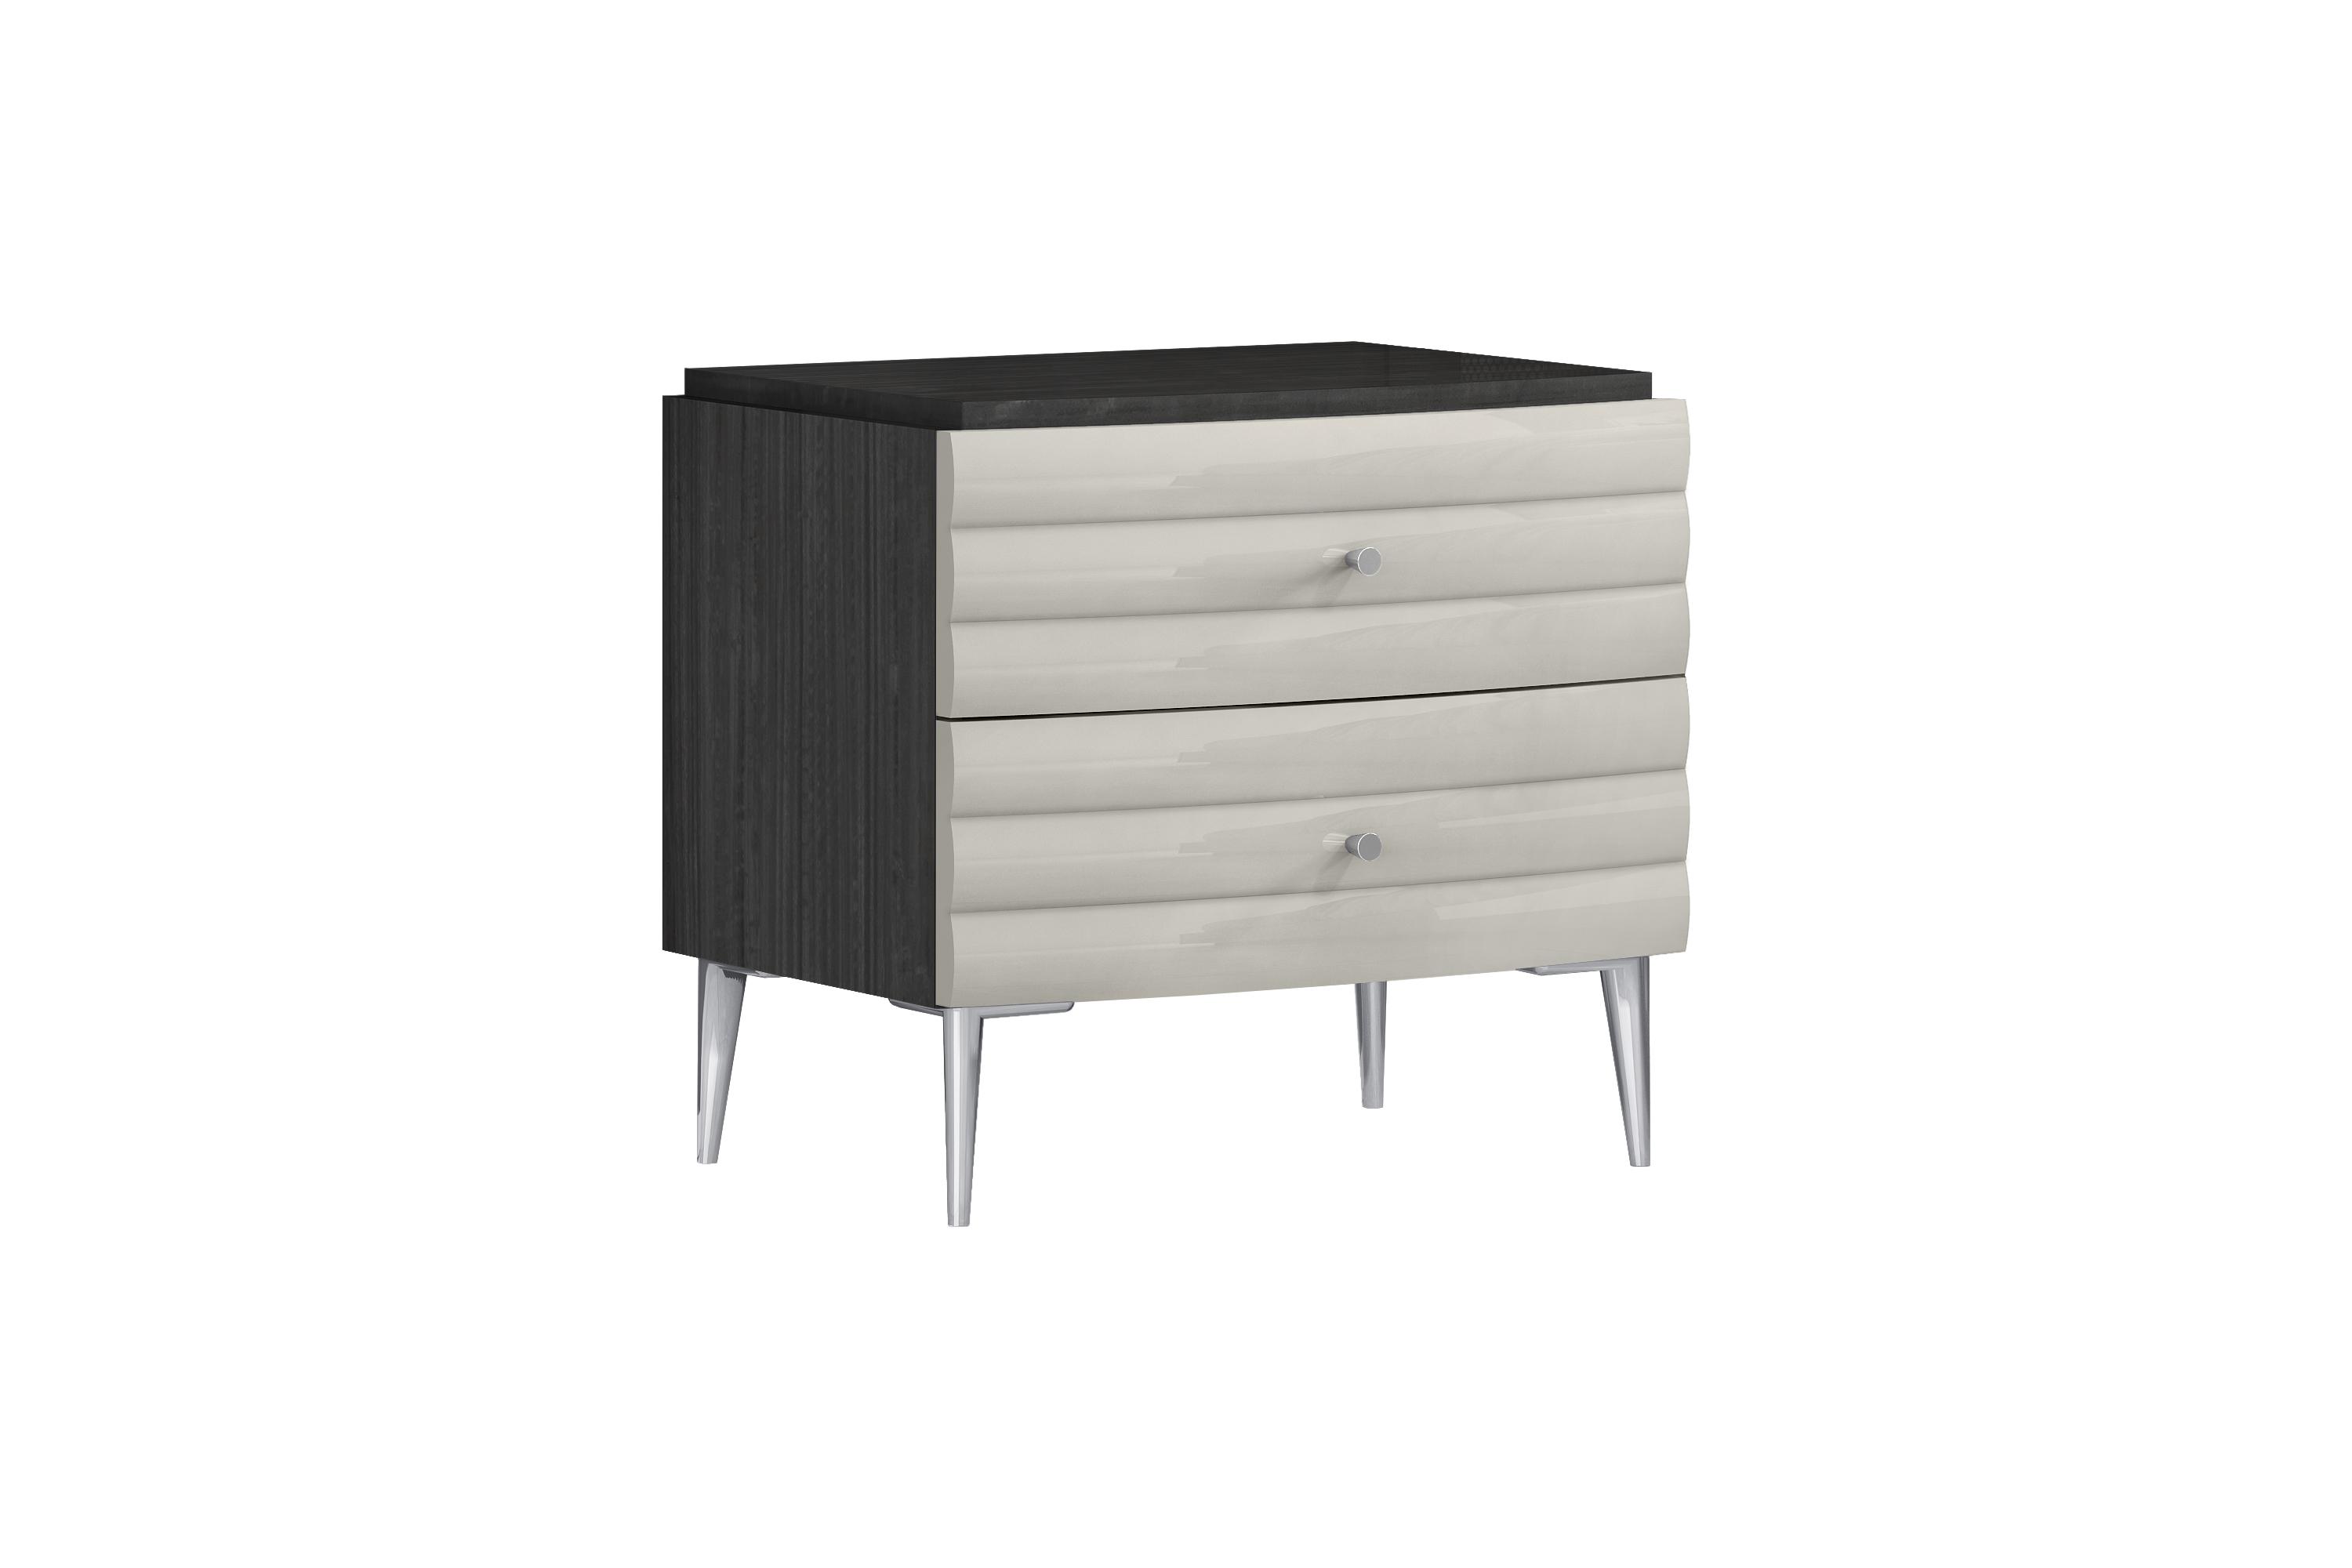 

    
Contemporary High Gloss Dark Gray Solid Wood Nightstand WhiteLine NS1752-DGRY/LGRY Pino
